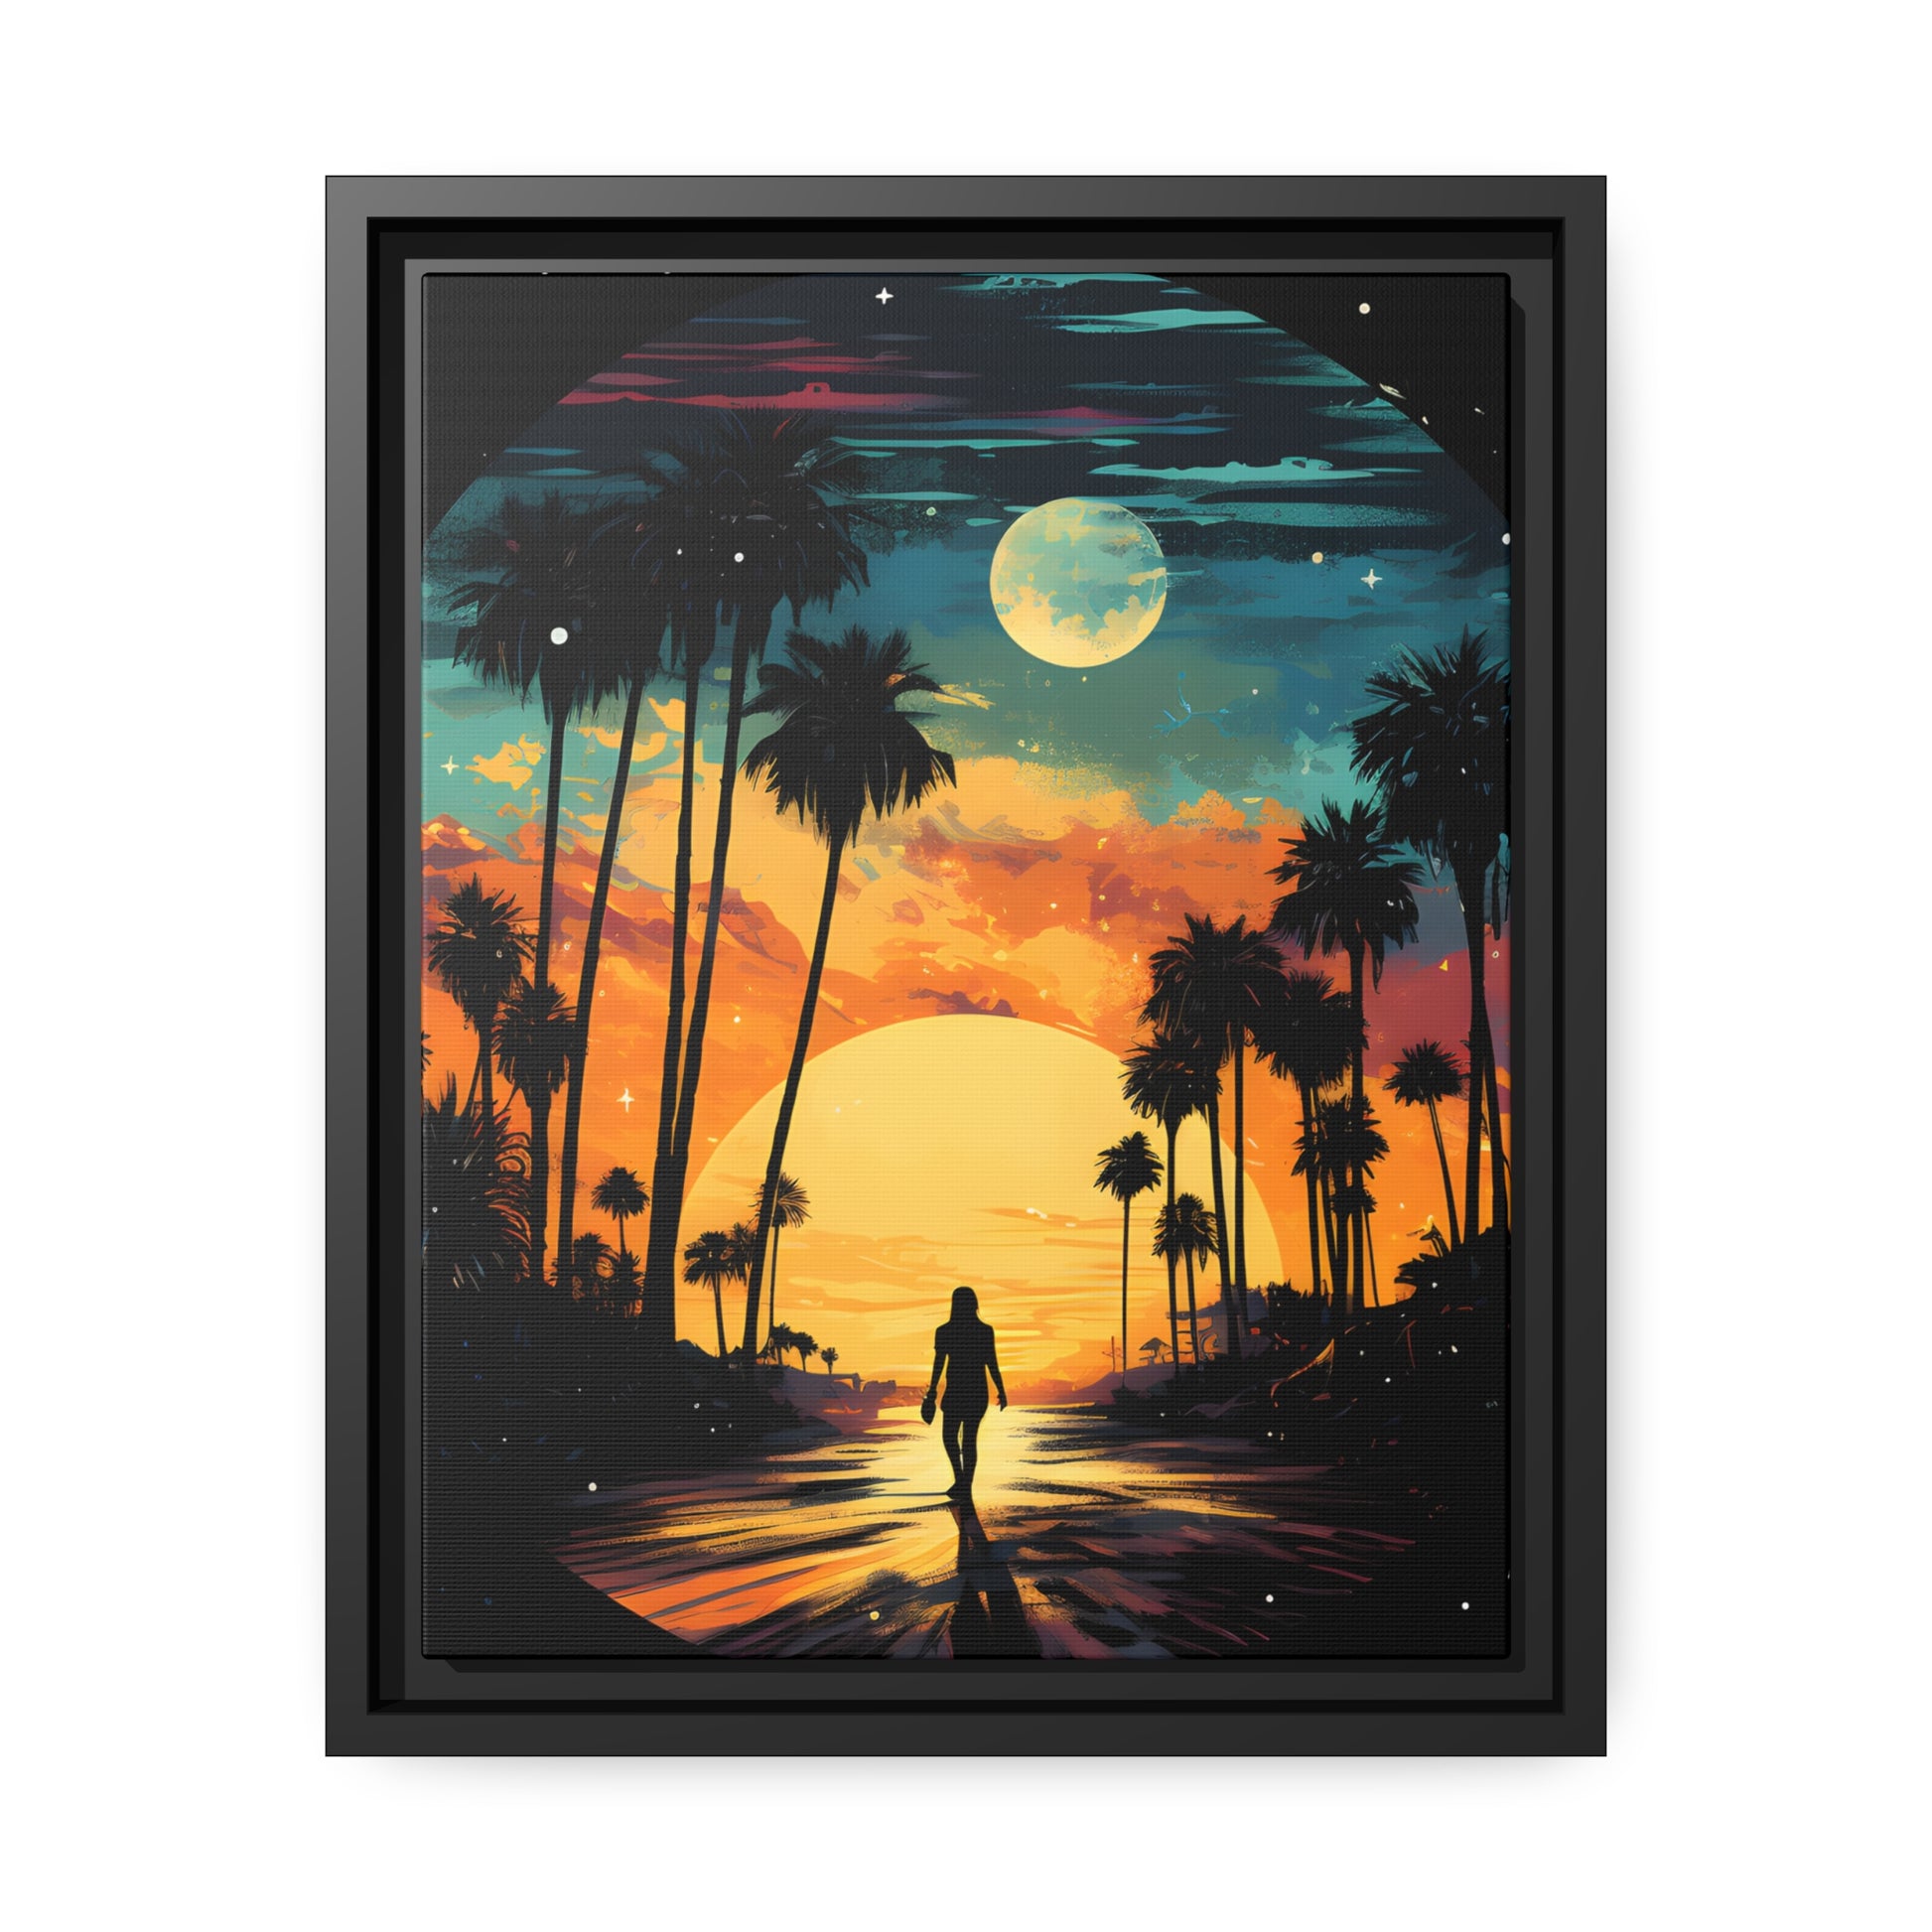 Framed Canvas Lifestyle/Ocean Side Artwork Dark Sunset Palm Tree Silhouettes Line The Pathway Large Sun Setting In Line With Perspective Moon Lit Star Filled Night Sky Floating Canvas Framed Artwork